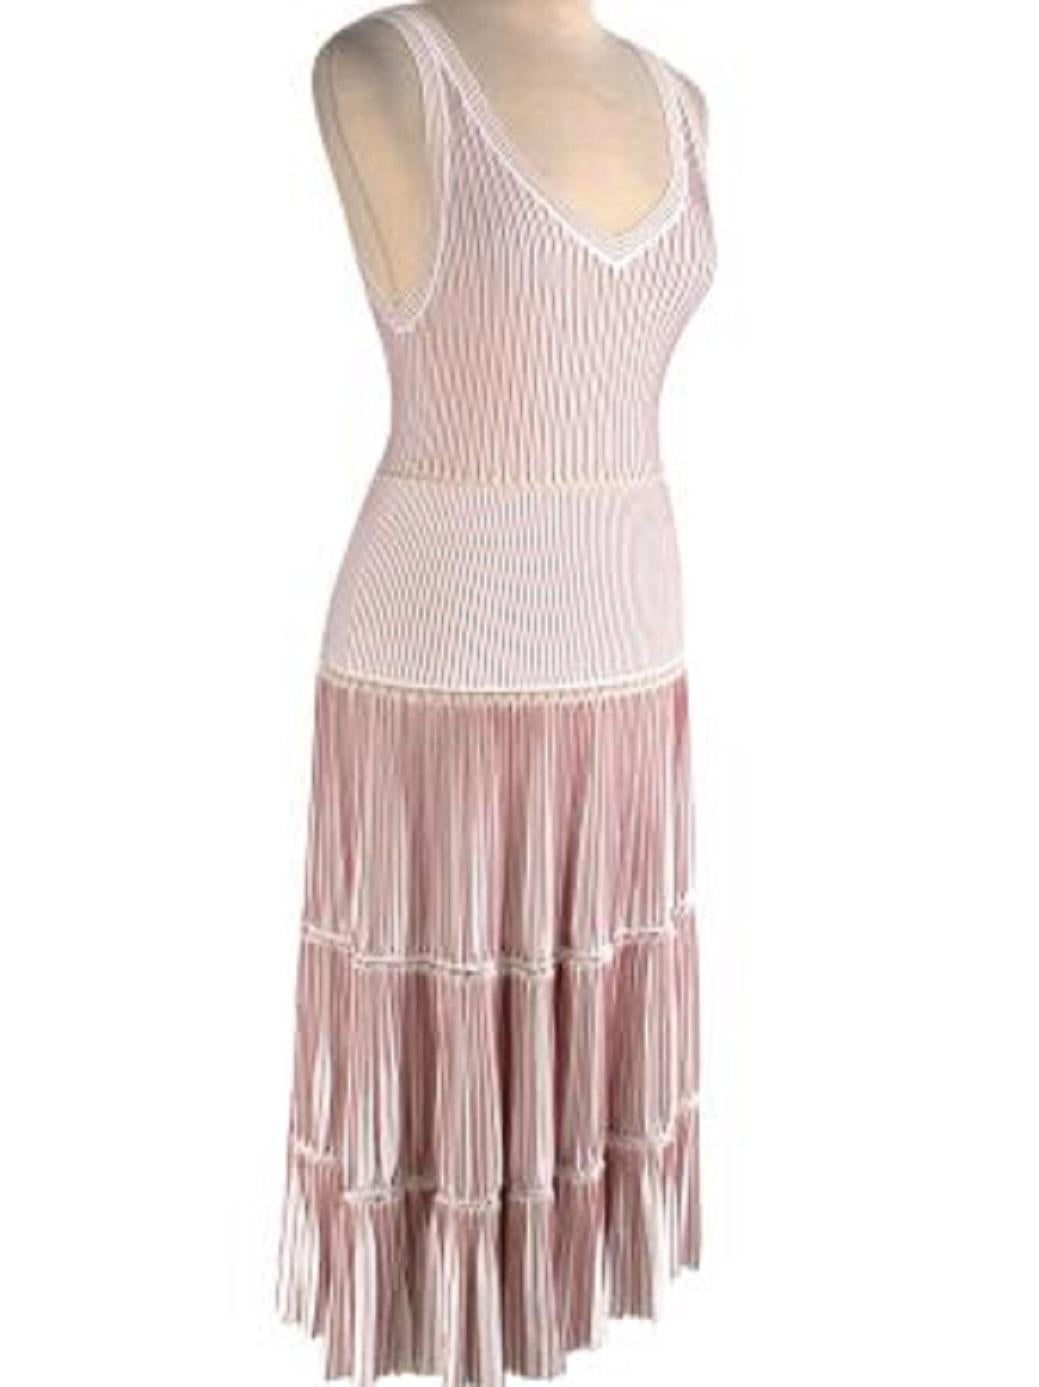 Alaia Pink and White Stretch Knit Skater Dress In Good Condition For Sale In London, GB